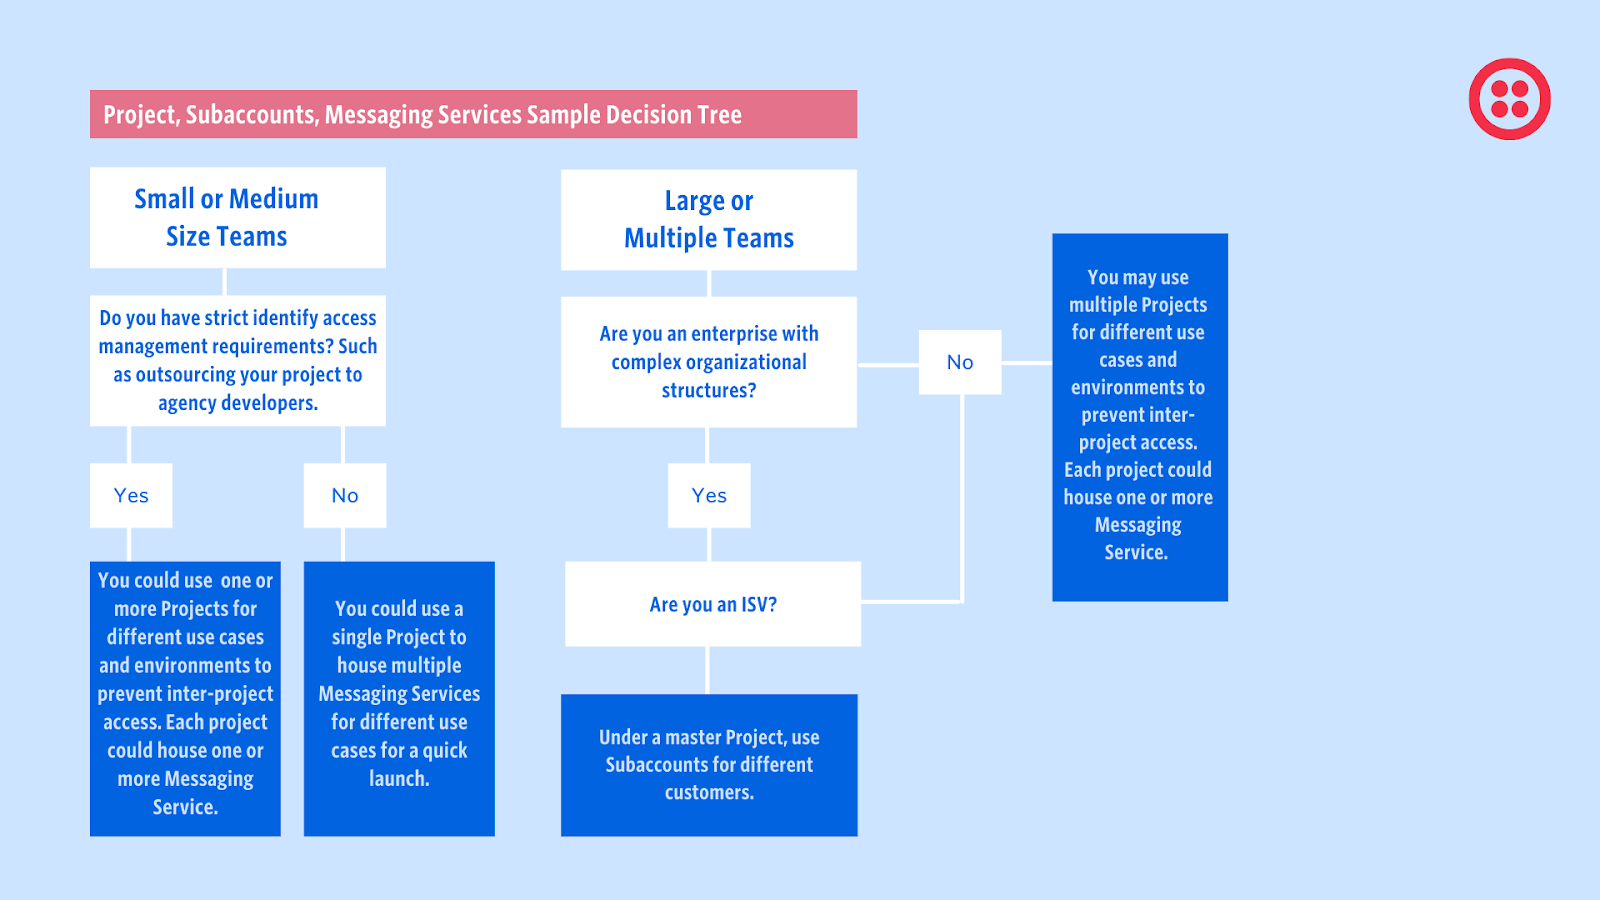 A decision tree designed to help you determine how many projects, subaccounts, and messaging services you may need.